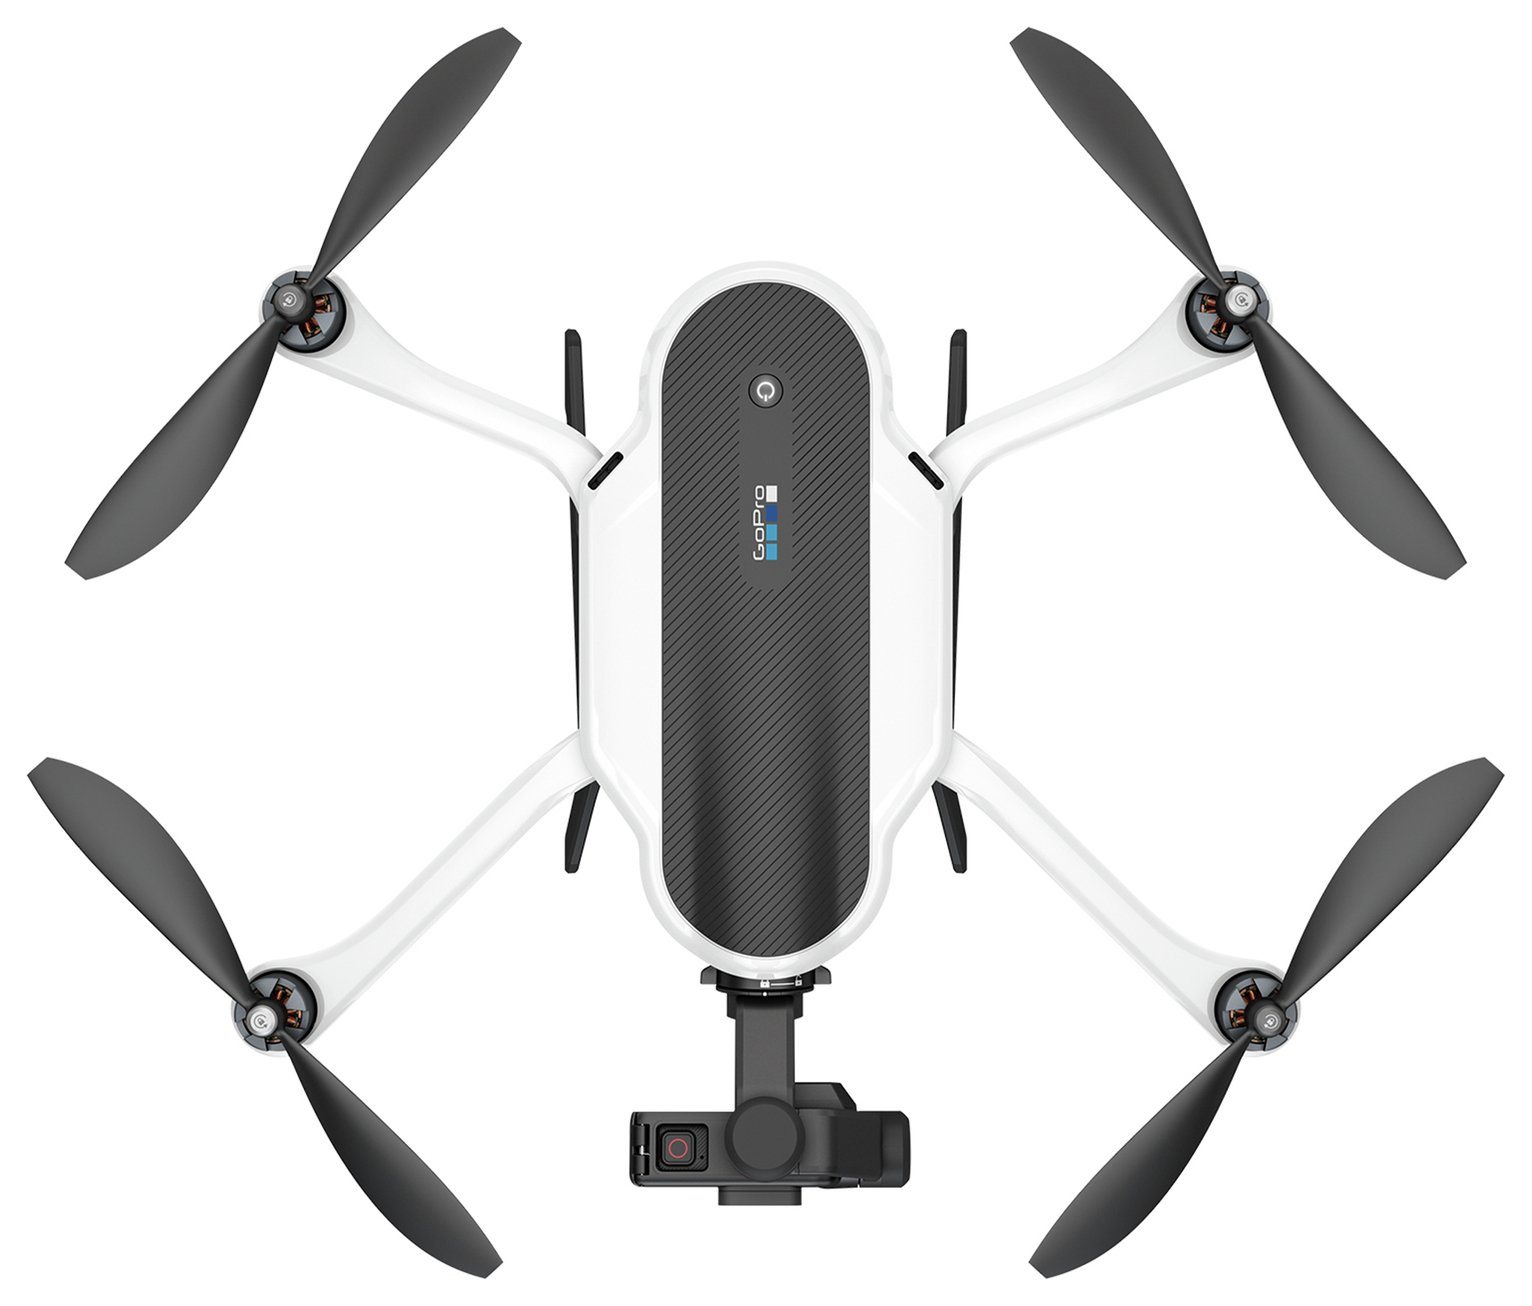 GoPro Karma Drone with Hero 5 Black Camera Review